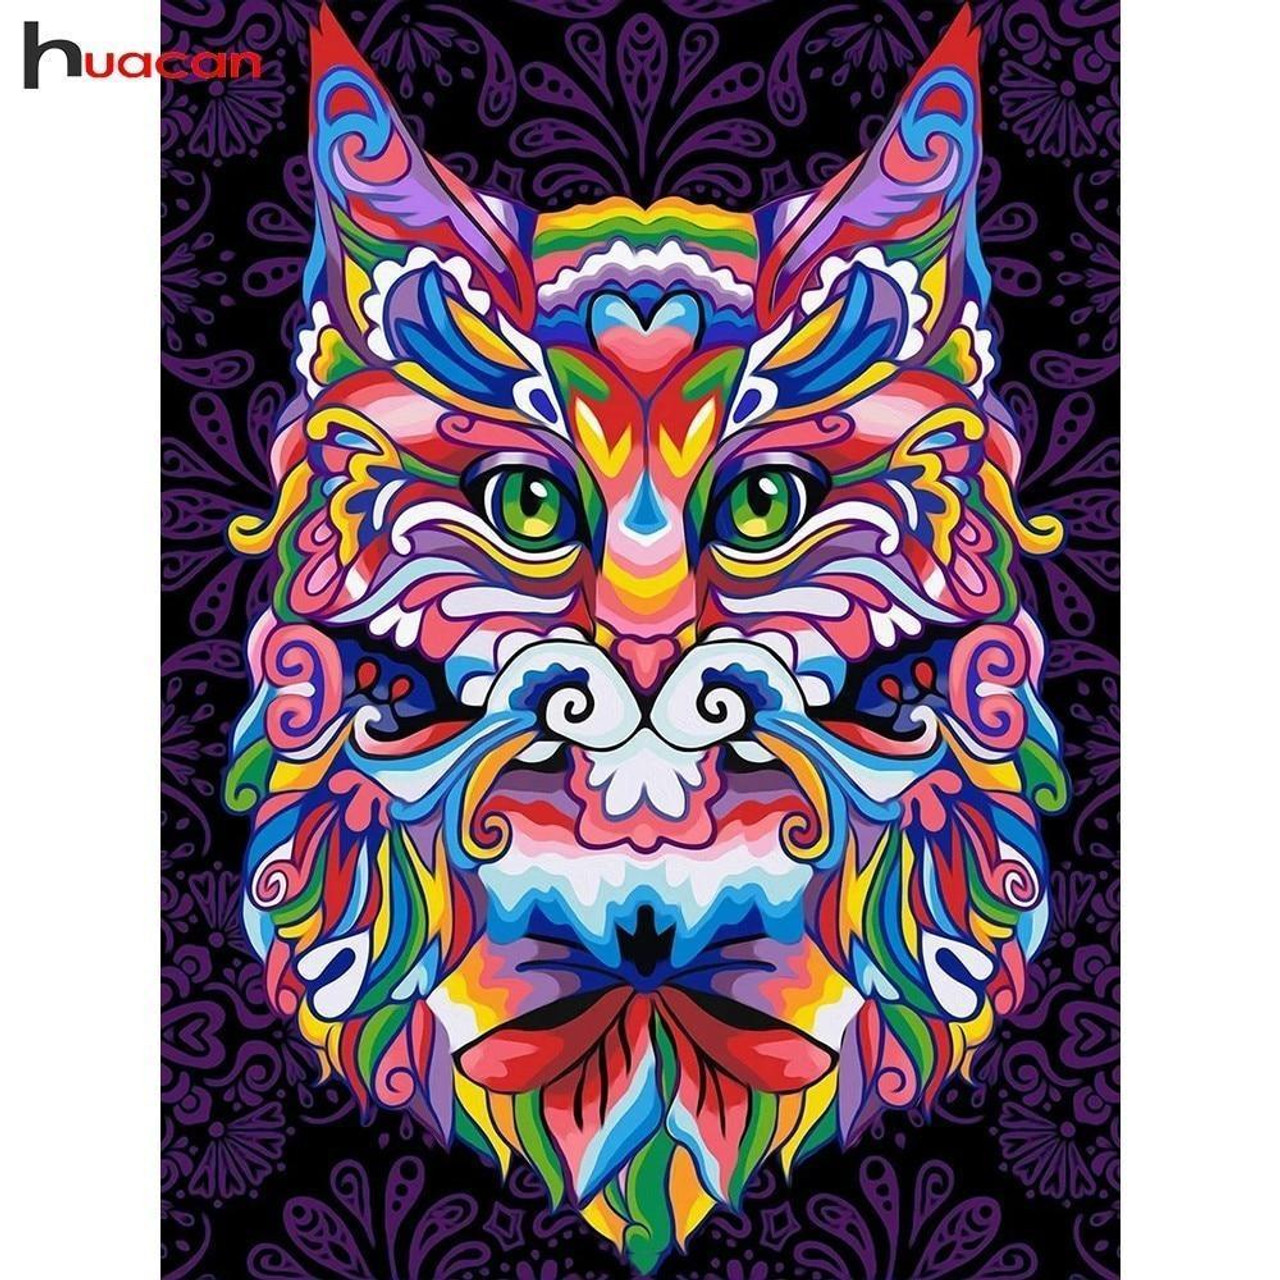 Abstract Cat Diamond Painting Kits 5D Diamond Art Kits for Adults, Large  Size (64x32 Inch), DIY Paint by Numbers, Diamond Dots, Crystal Rhinestone